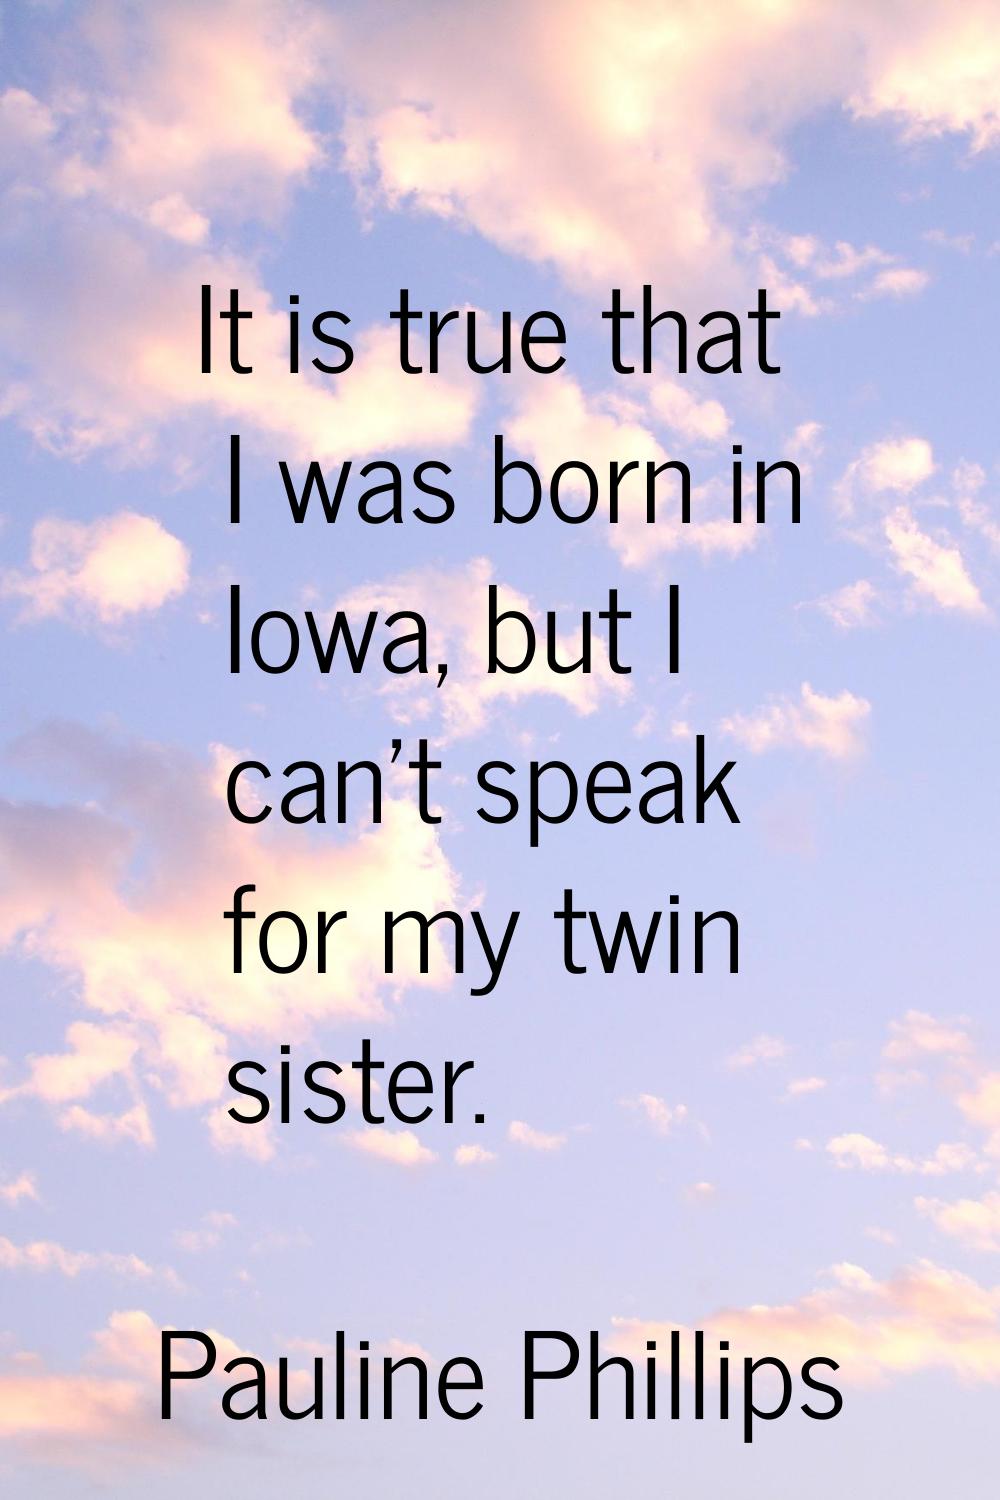 It is true that I was born in Iowa, but I can't speak for my twin sister.